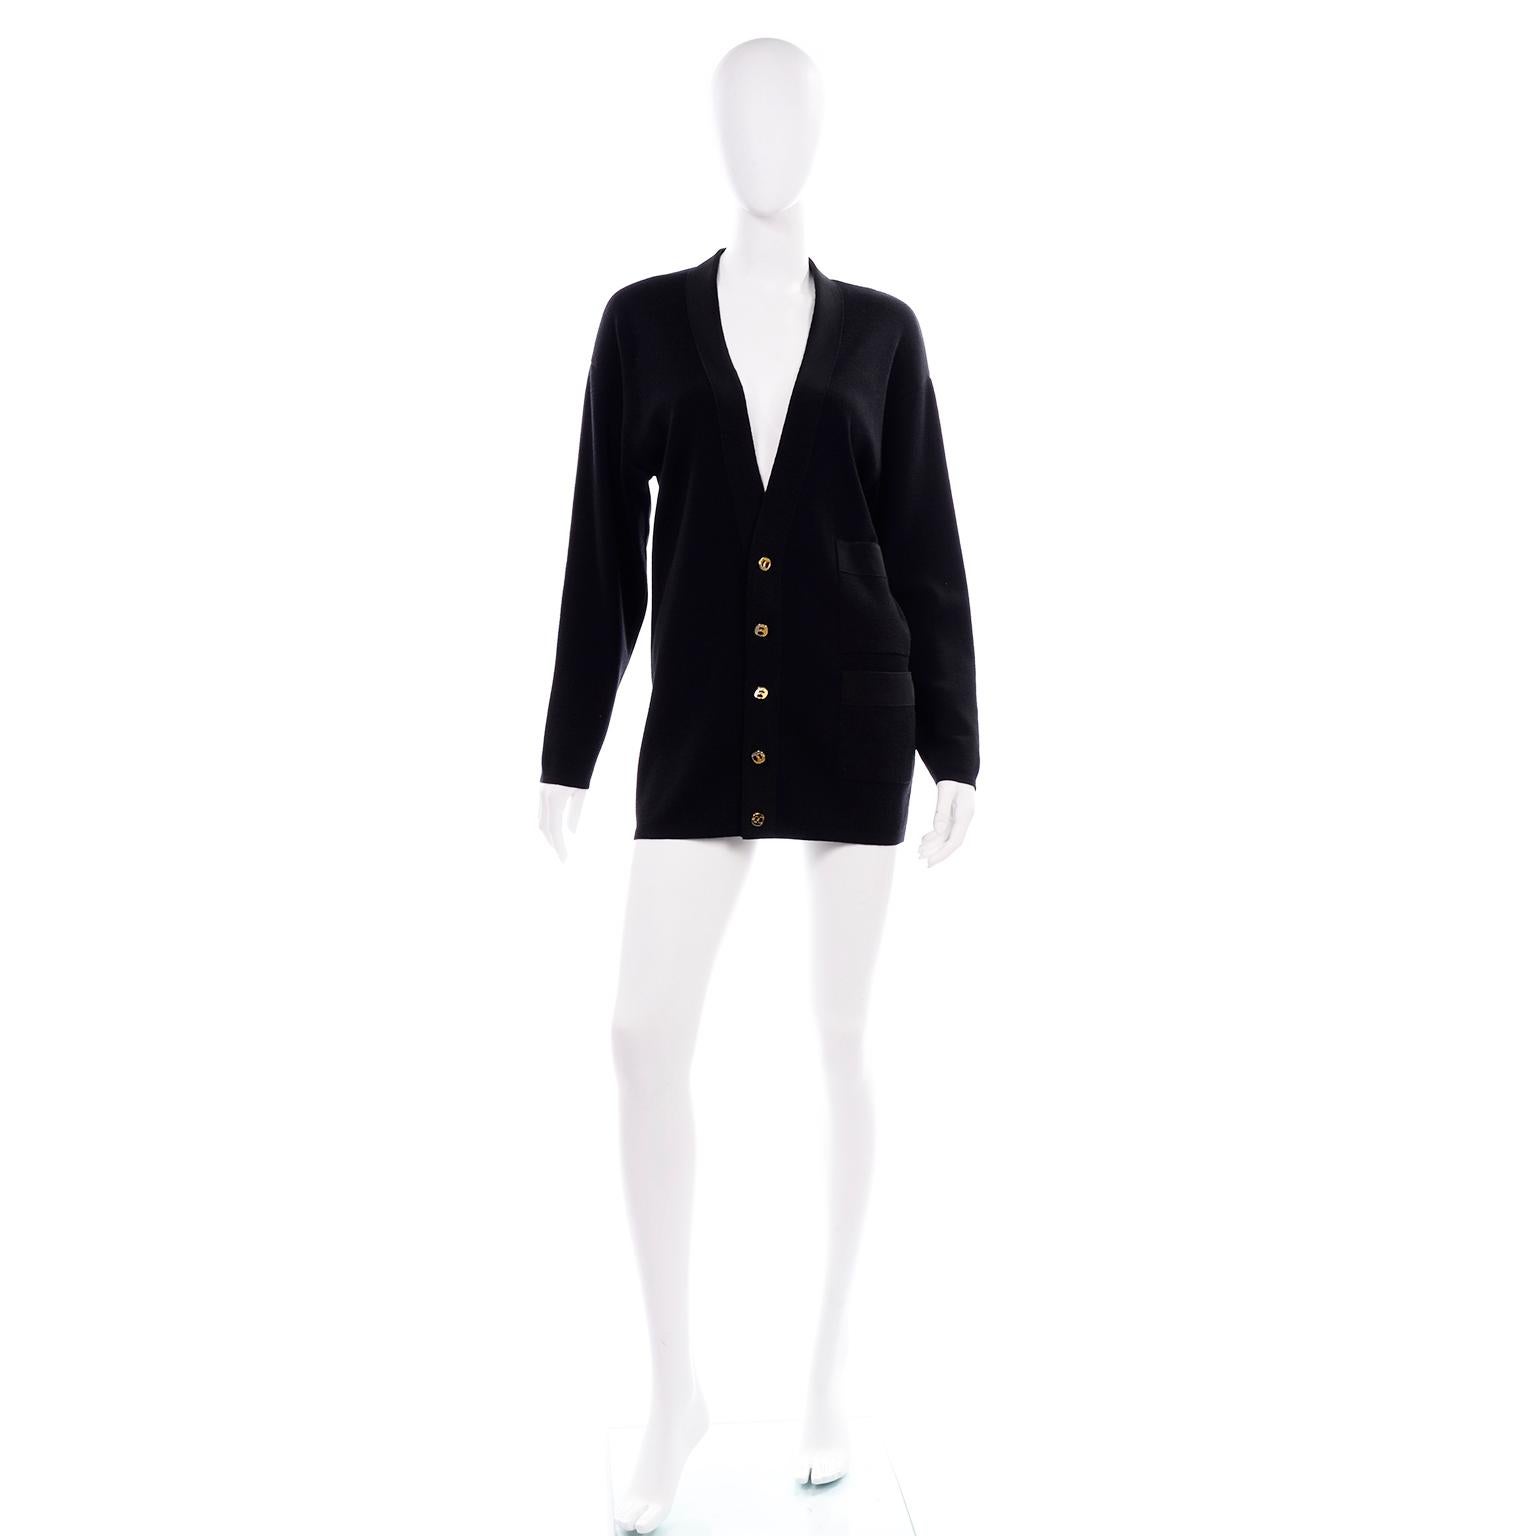 This is a timeless vintage Salvatore Ferragamo black wool cardigan with two tone metal buttons.  The collar and pockets have a tonal ribbon edges and one side of the cardigan has 2 stacked pockets. 
Made in Italy in the 1990's. . Labeled size XS.